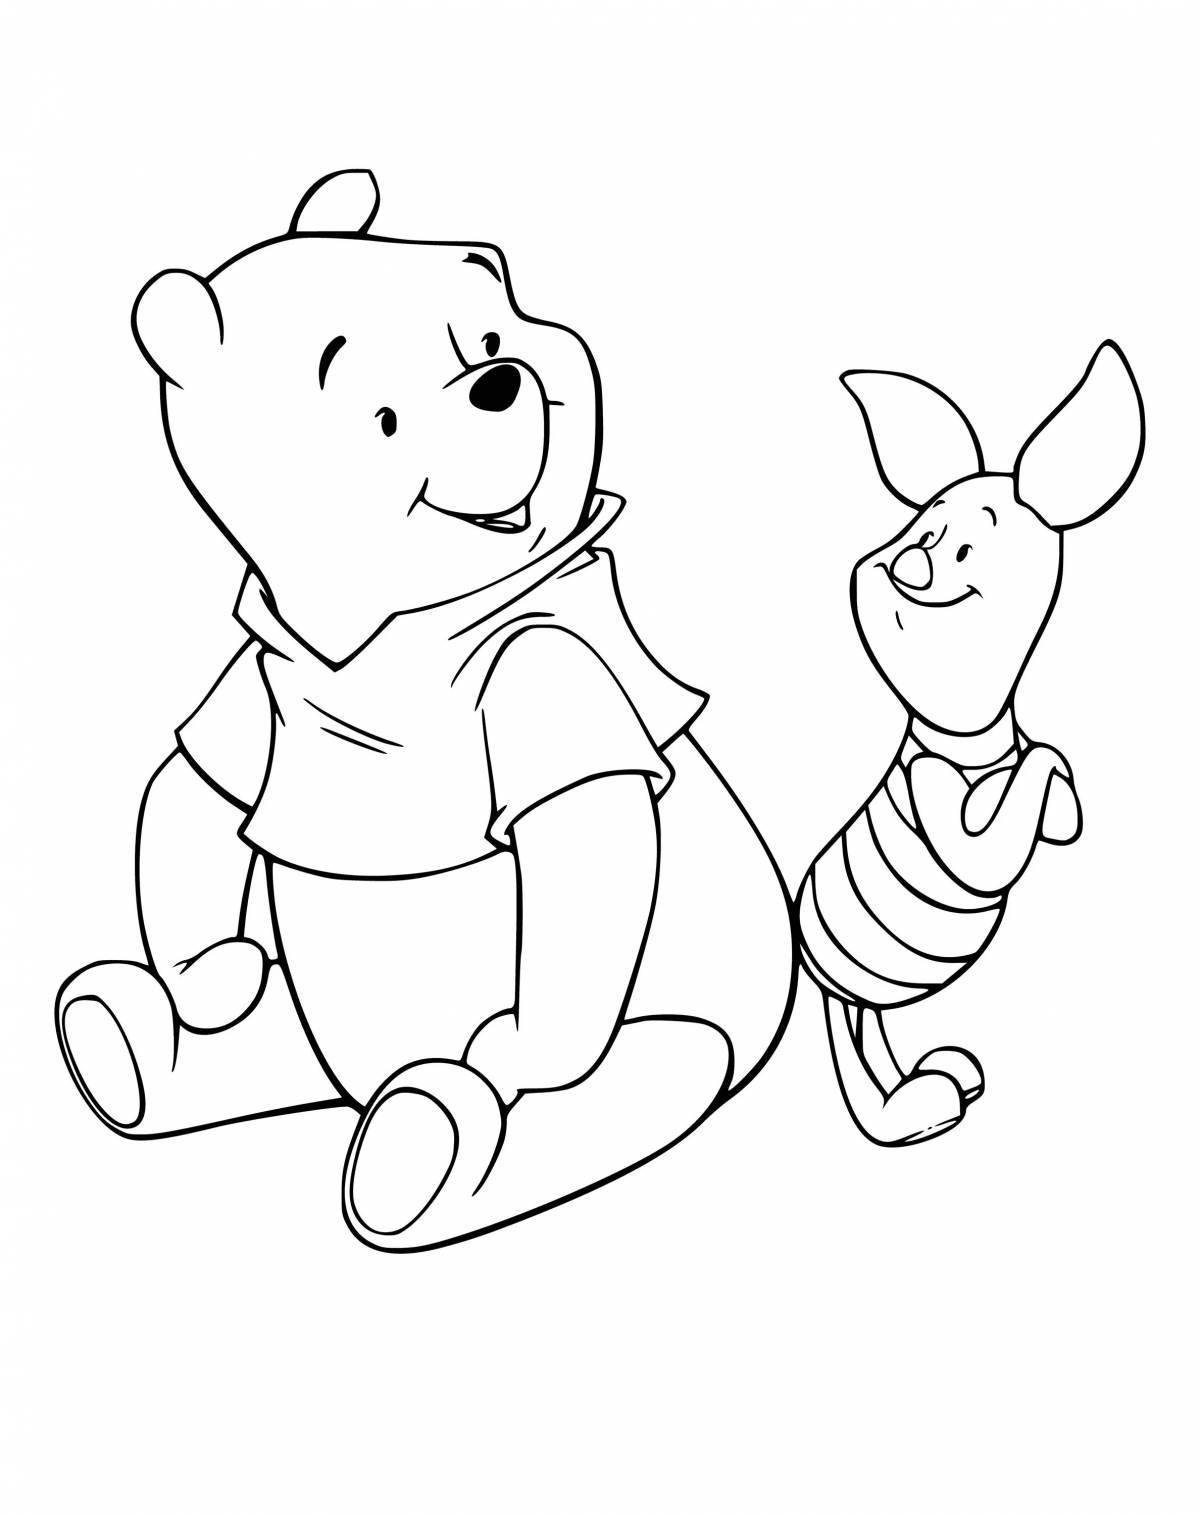 Adorable winnie the pooh coloring book